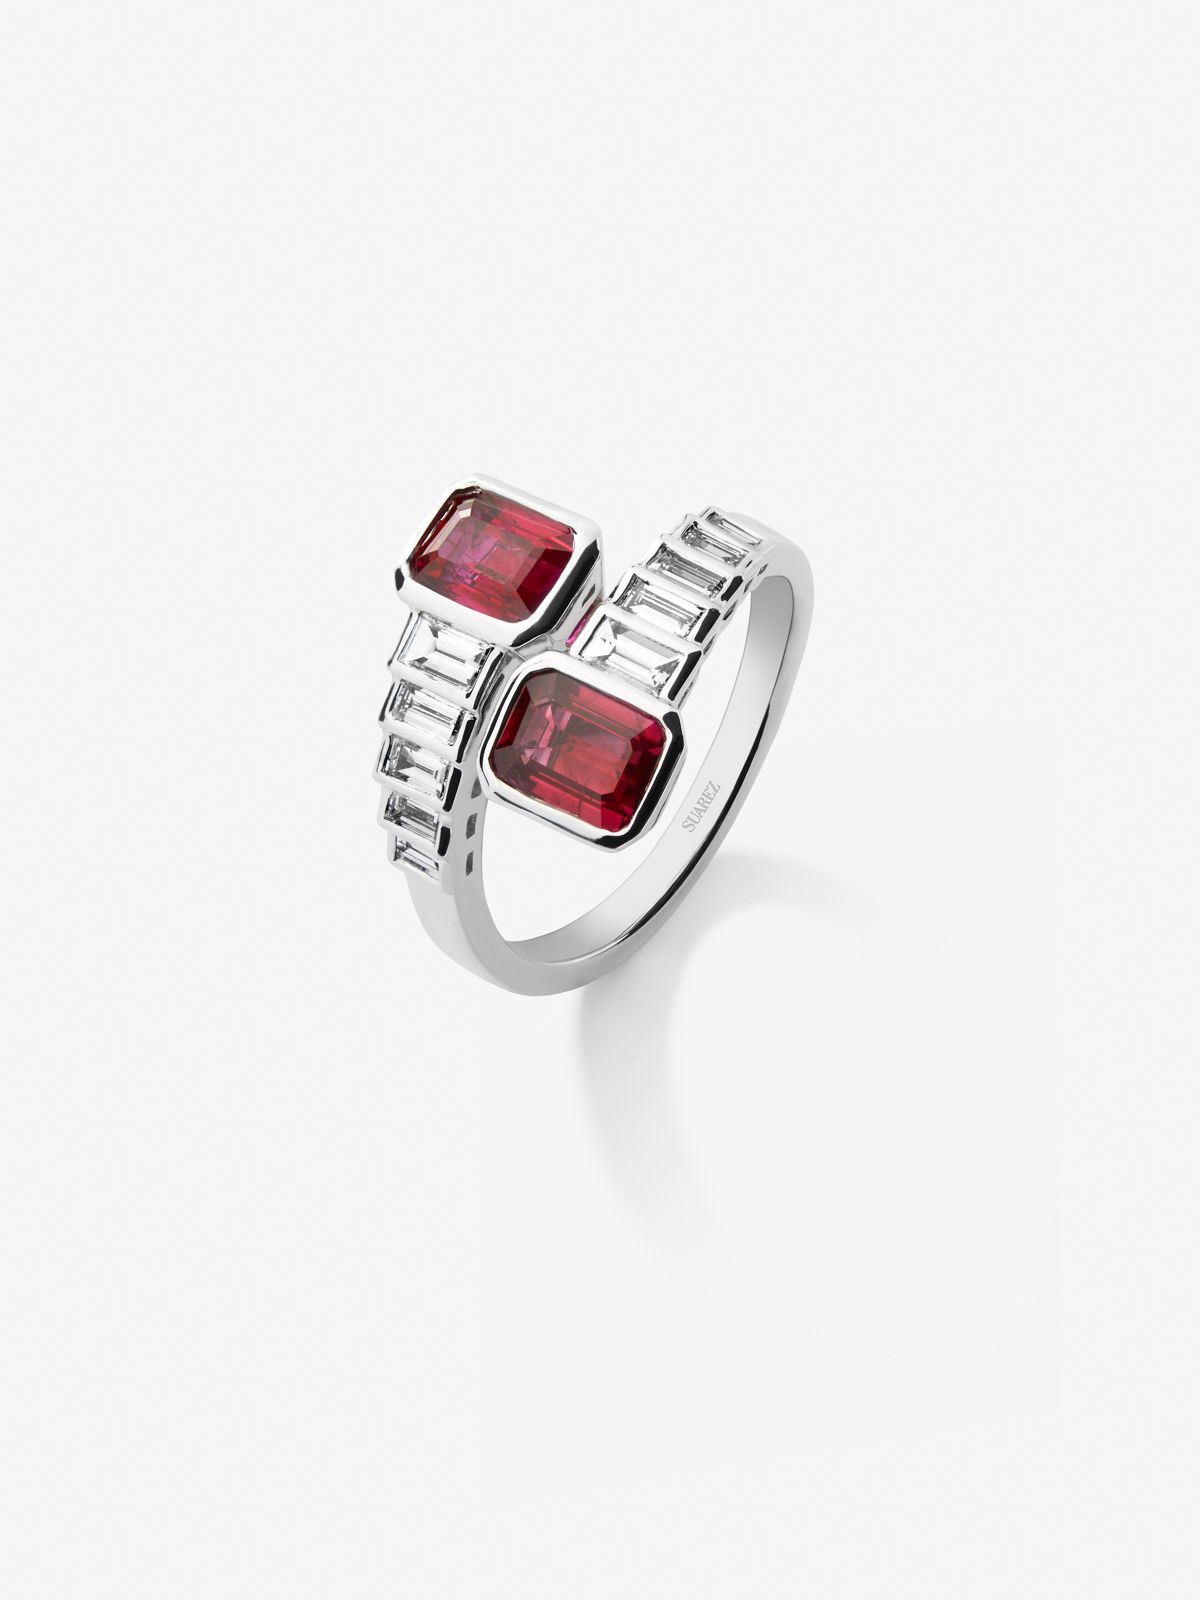 You and I 18k White Gold Ring with Red Rubyes in octagonal 2,06 cts and white diamonds in 0.57 CTS baggos